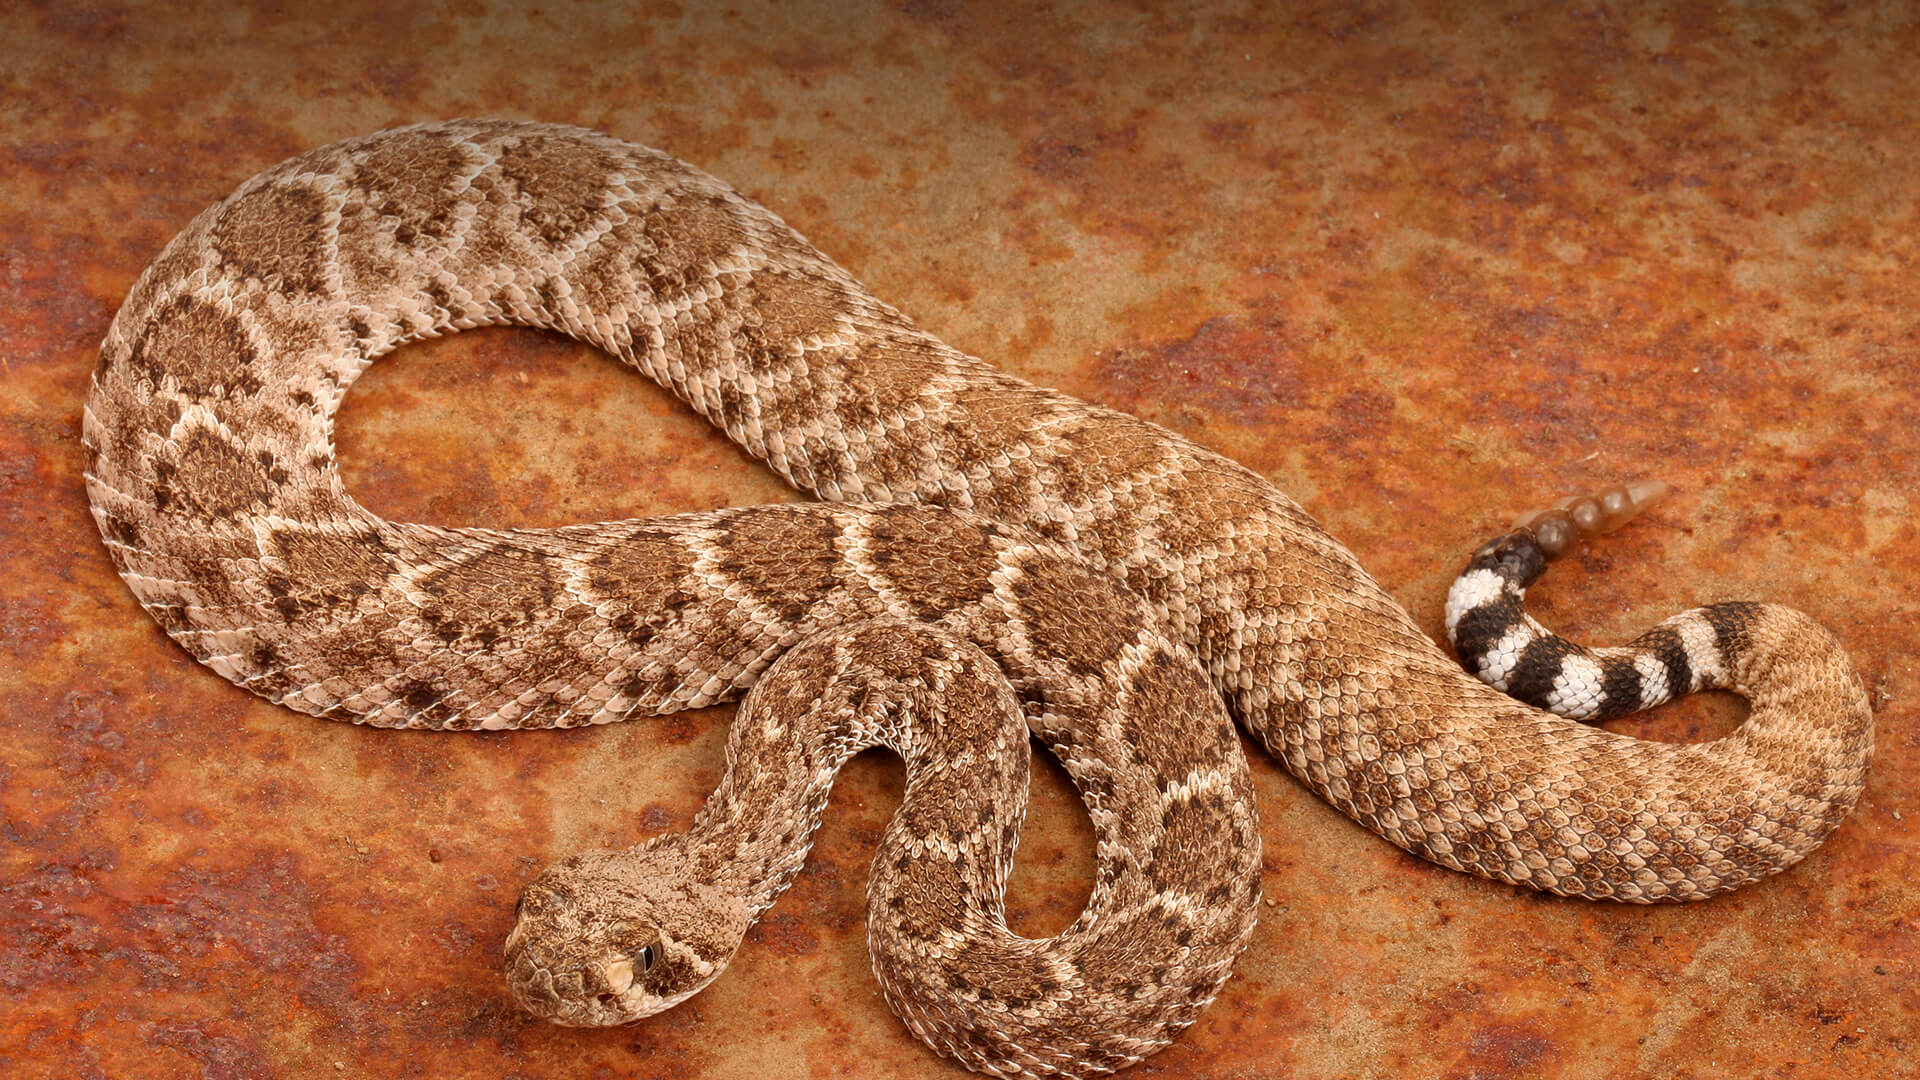 What Are Rattlesnakes Good for?